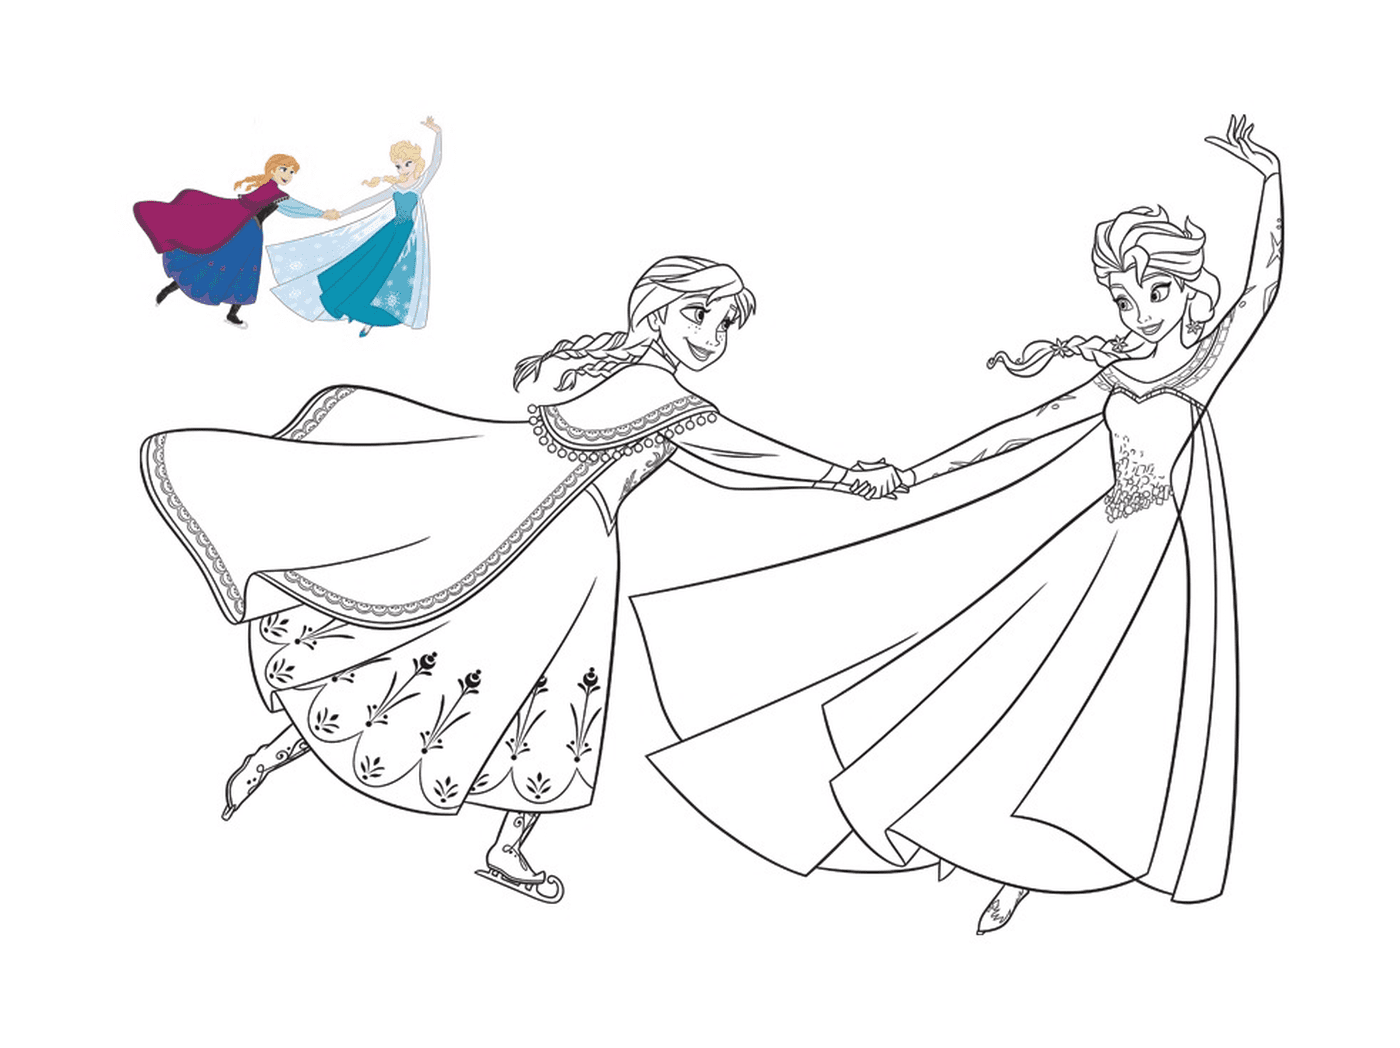  Elsa and Anna skate happily 